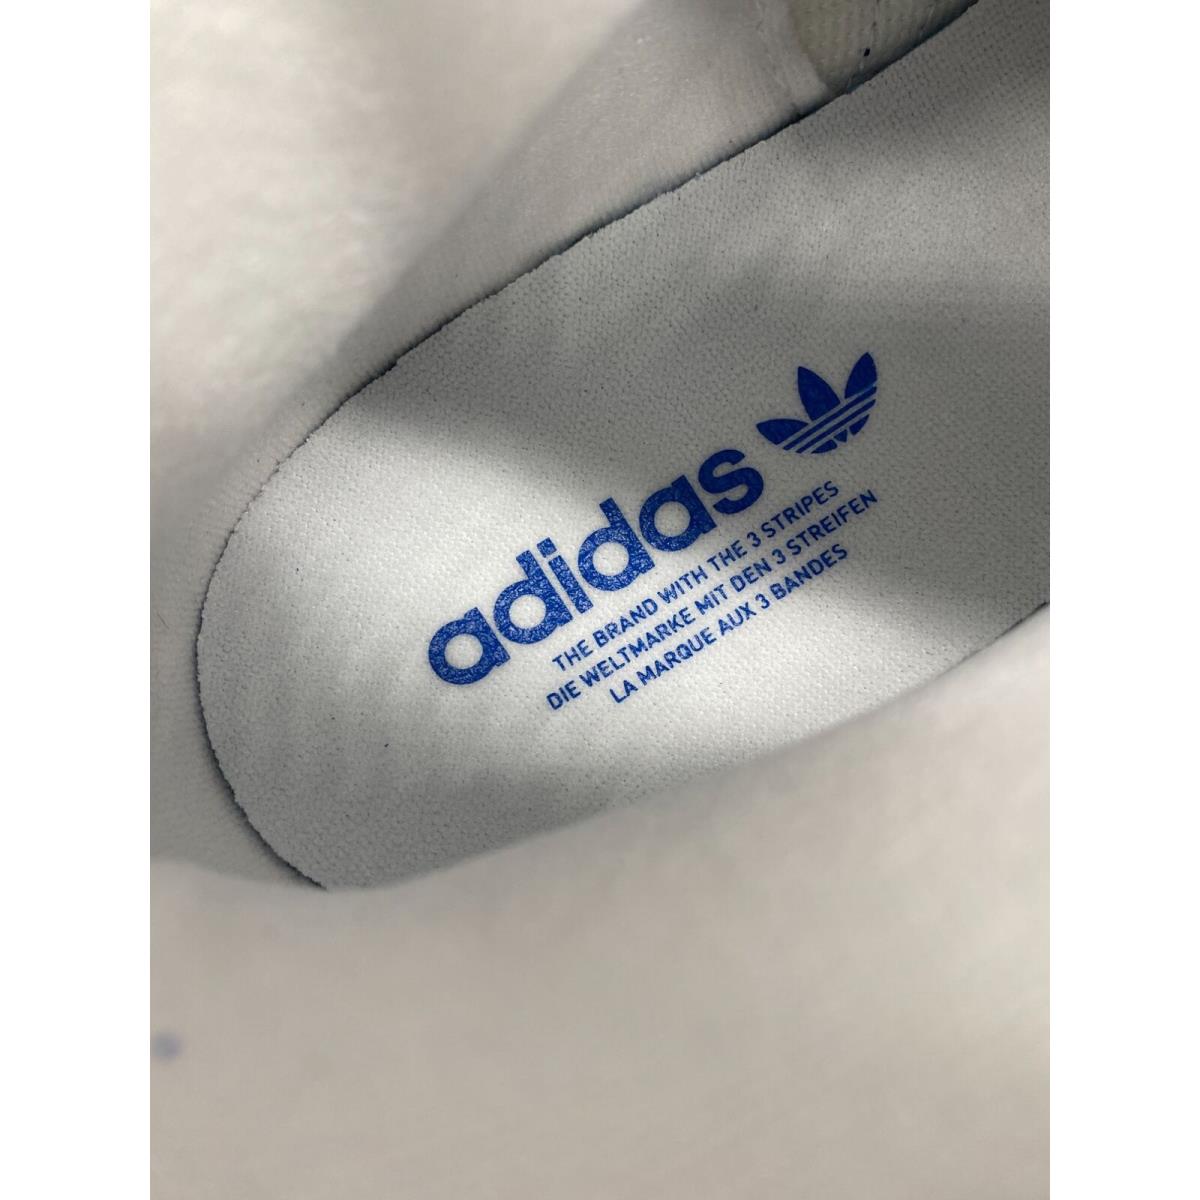 Adidas shoes  - white/blue/red 9